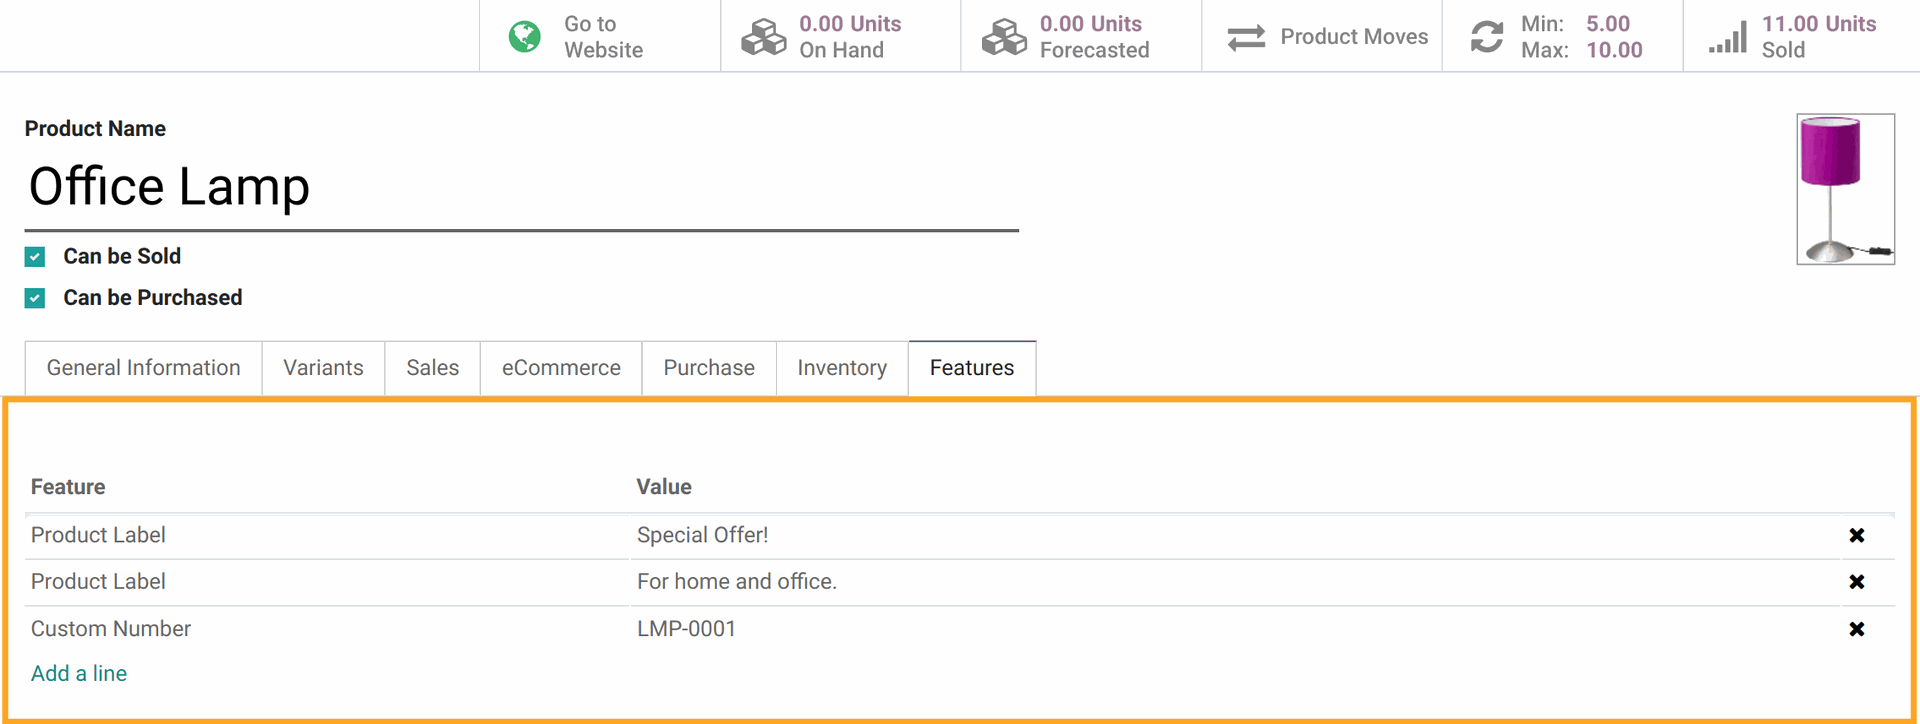 Odoo 14.0 Product Features